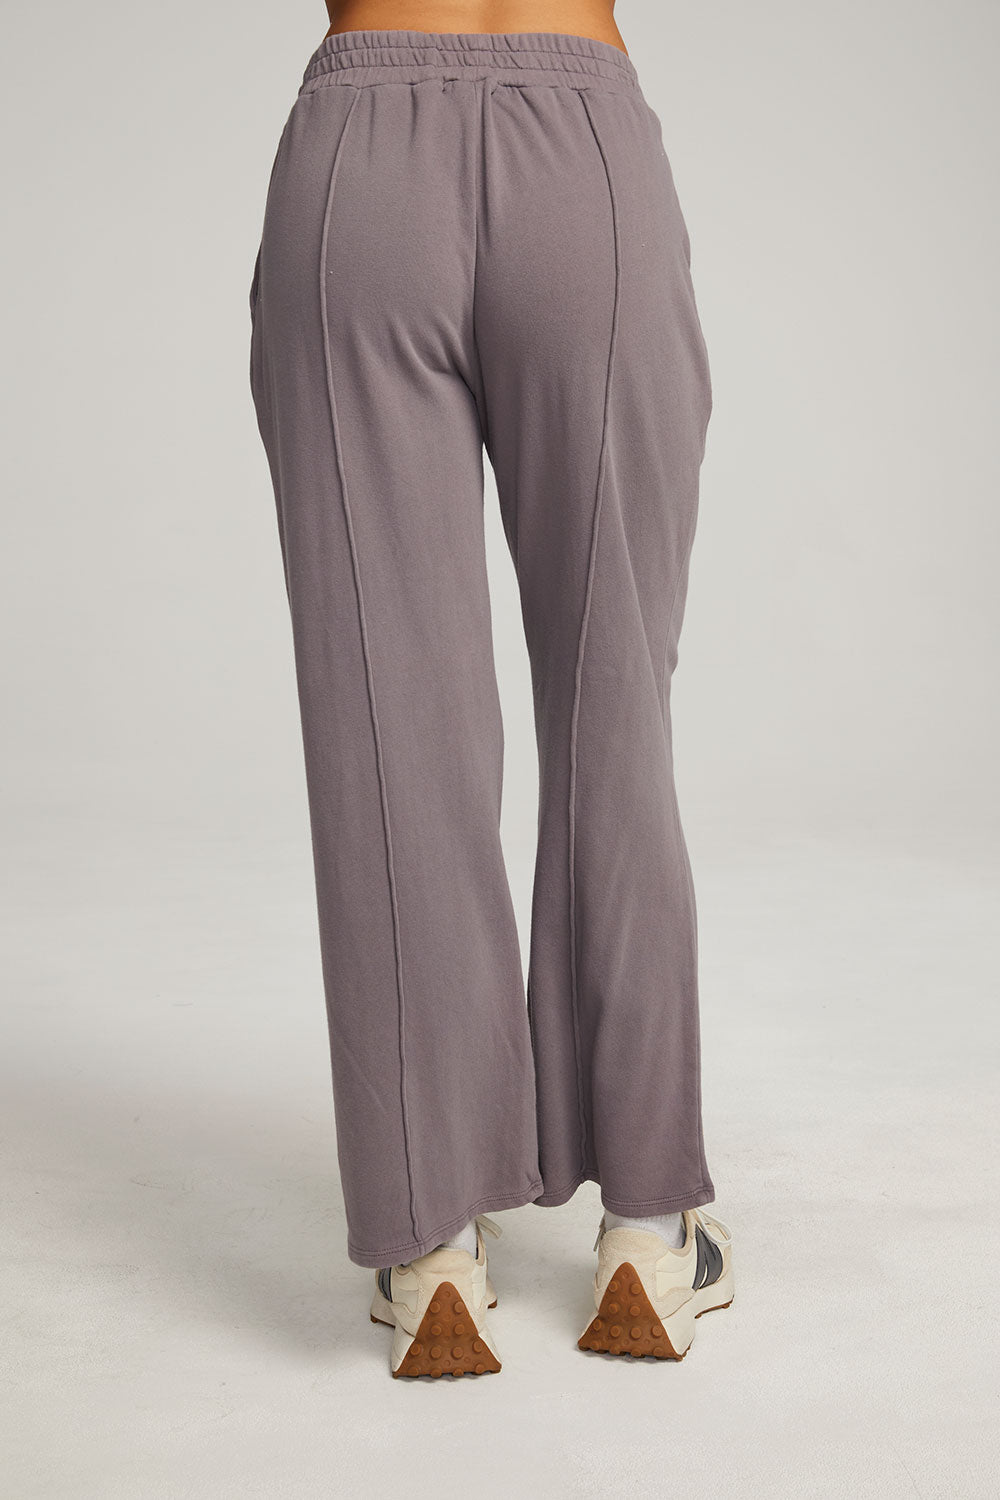 Amarillo Purple Sage Trousers WOMENS chaserbrand